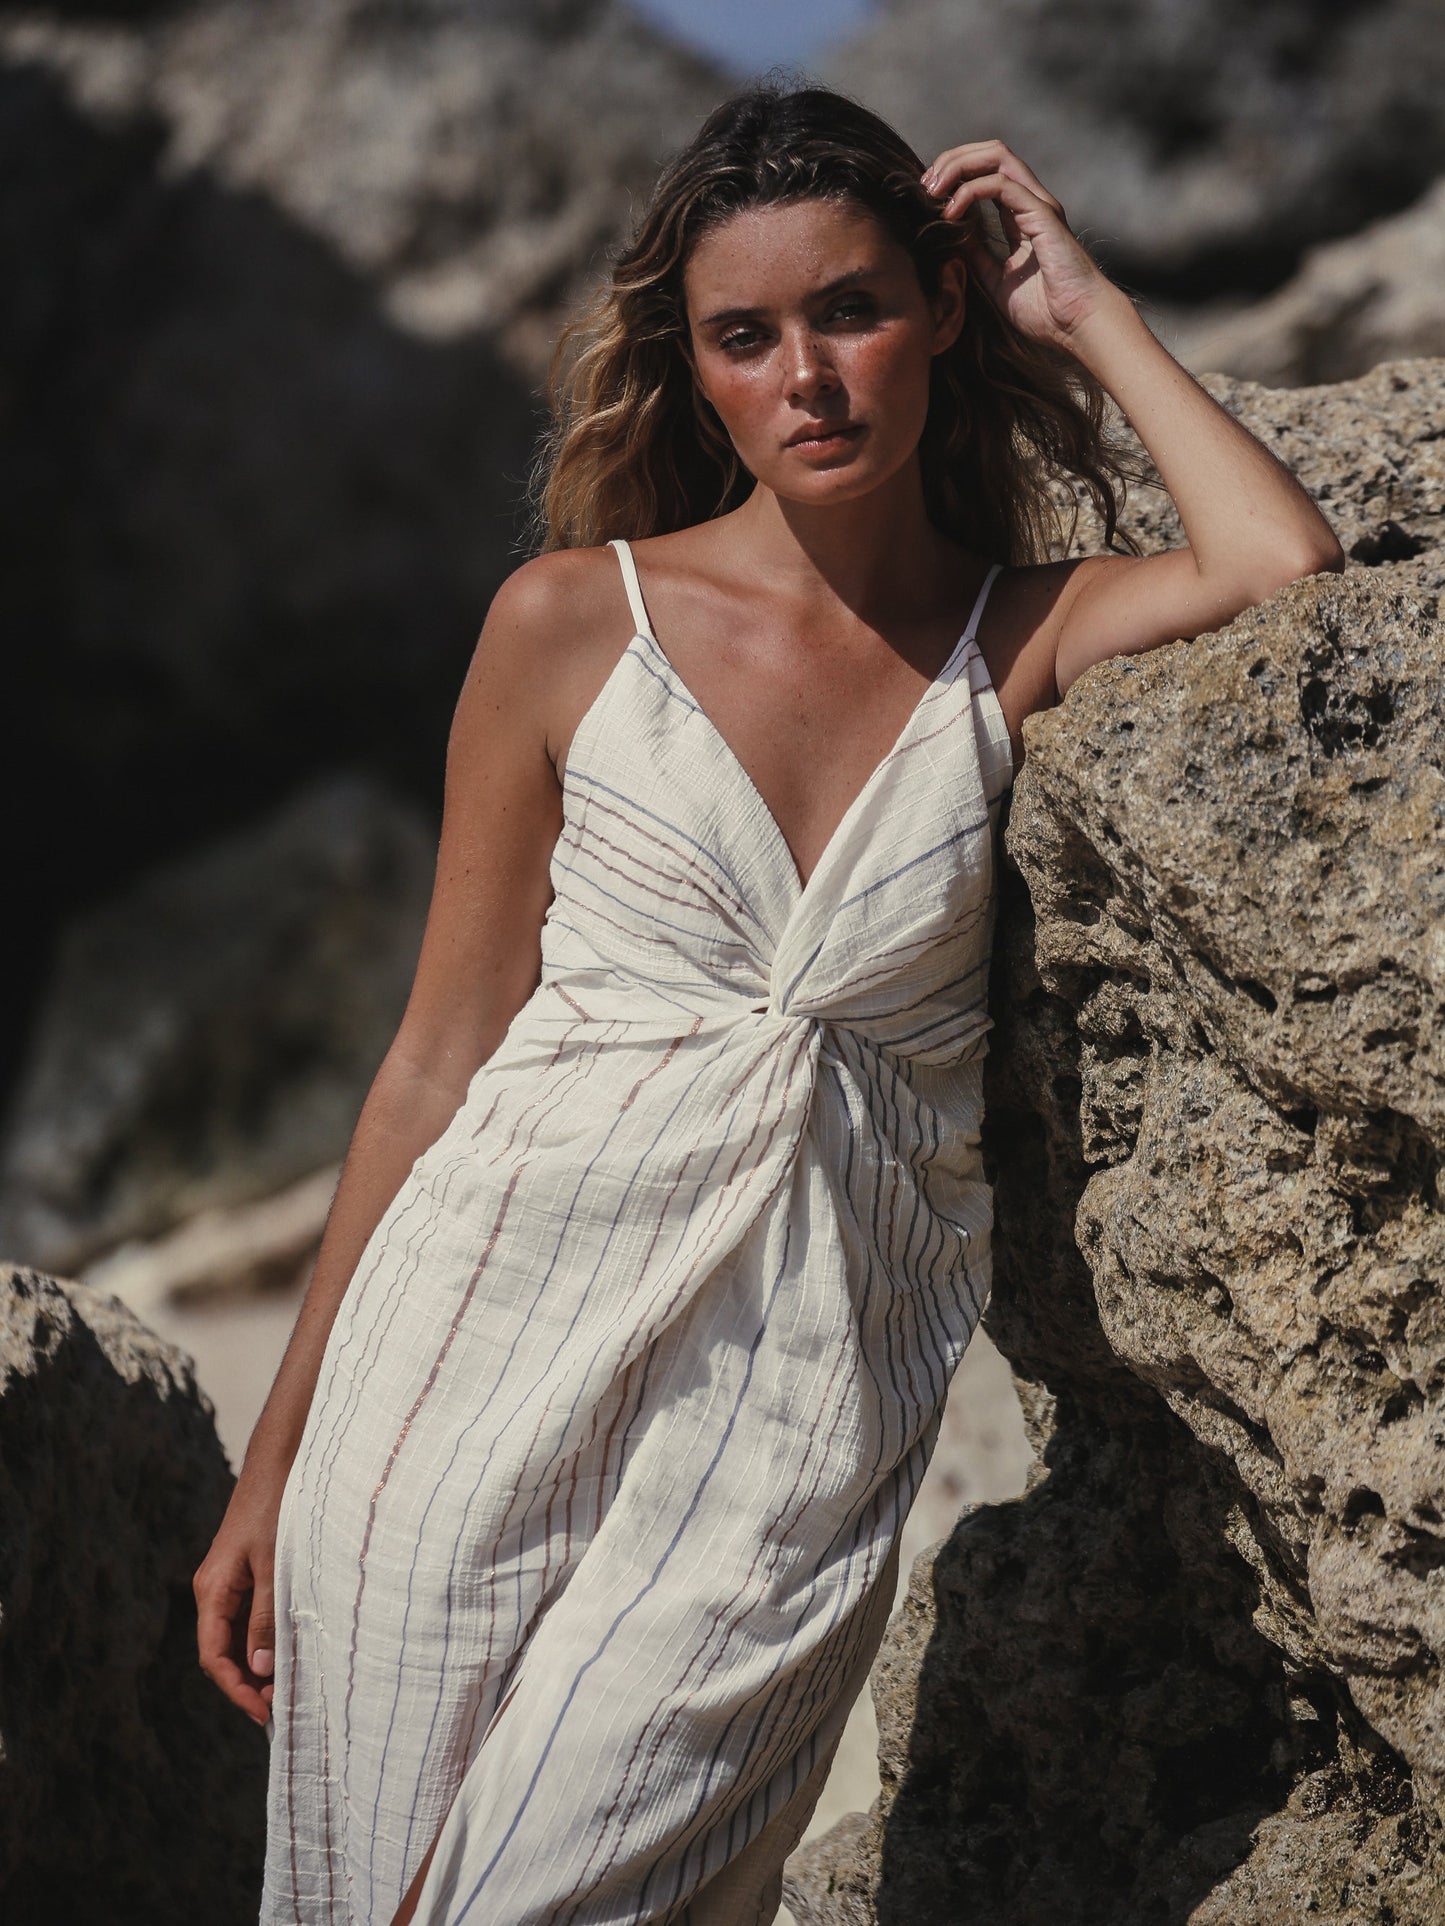 Celia Striped Dress - Natural by The Handloom